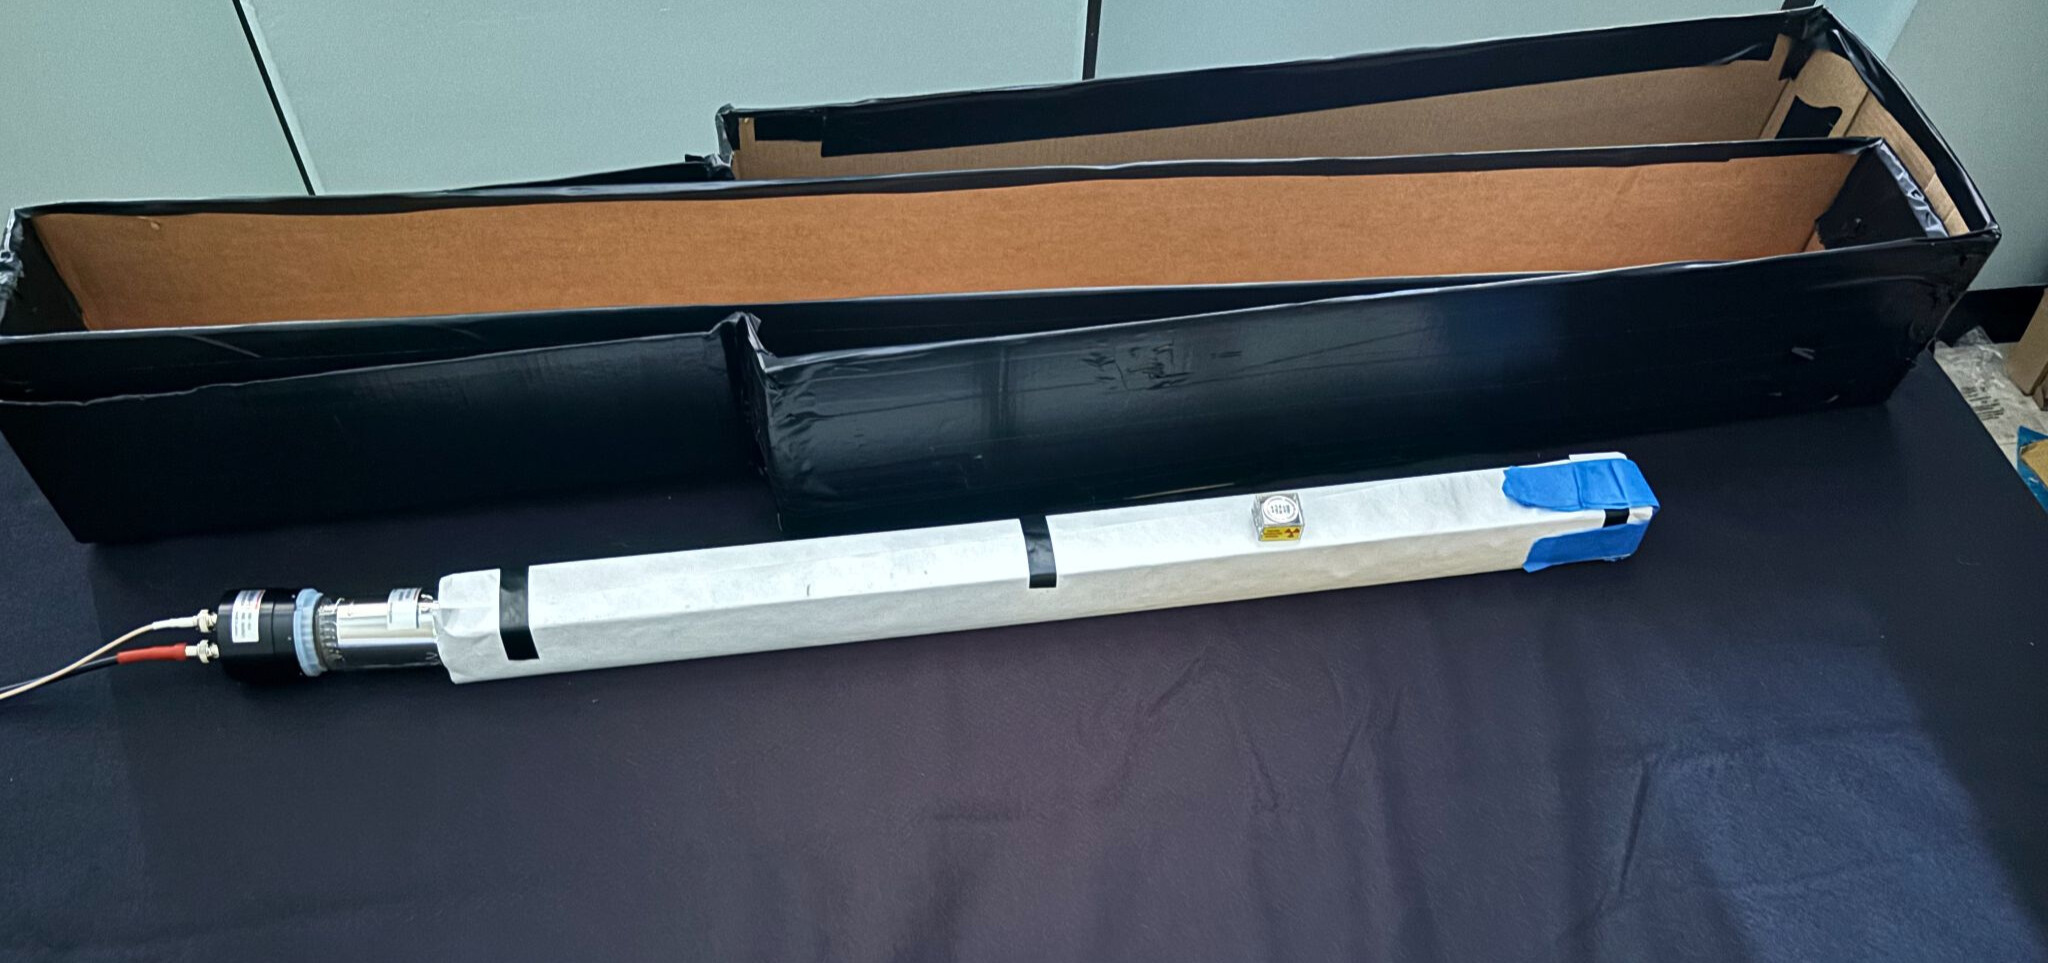 One of the FORMOSA demonstrator's scintillator bars with a PMT attachment. (Courtesy of Ayush Gilotra)